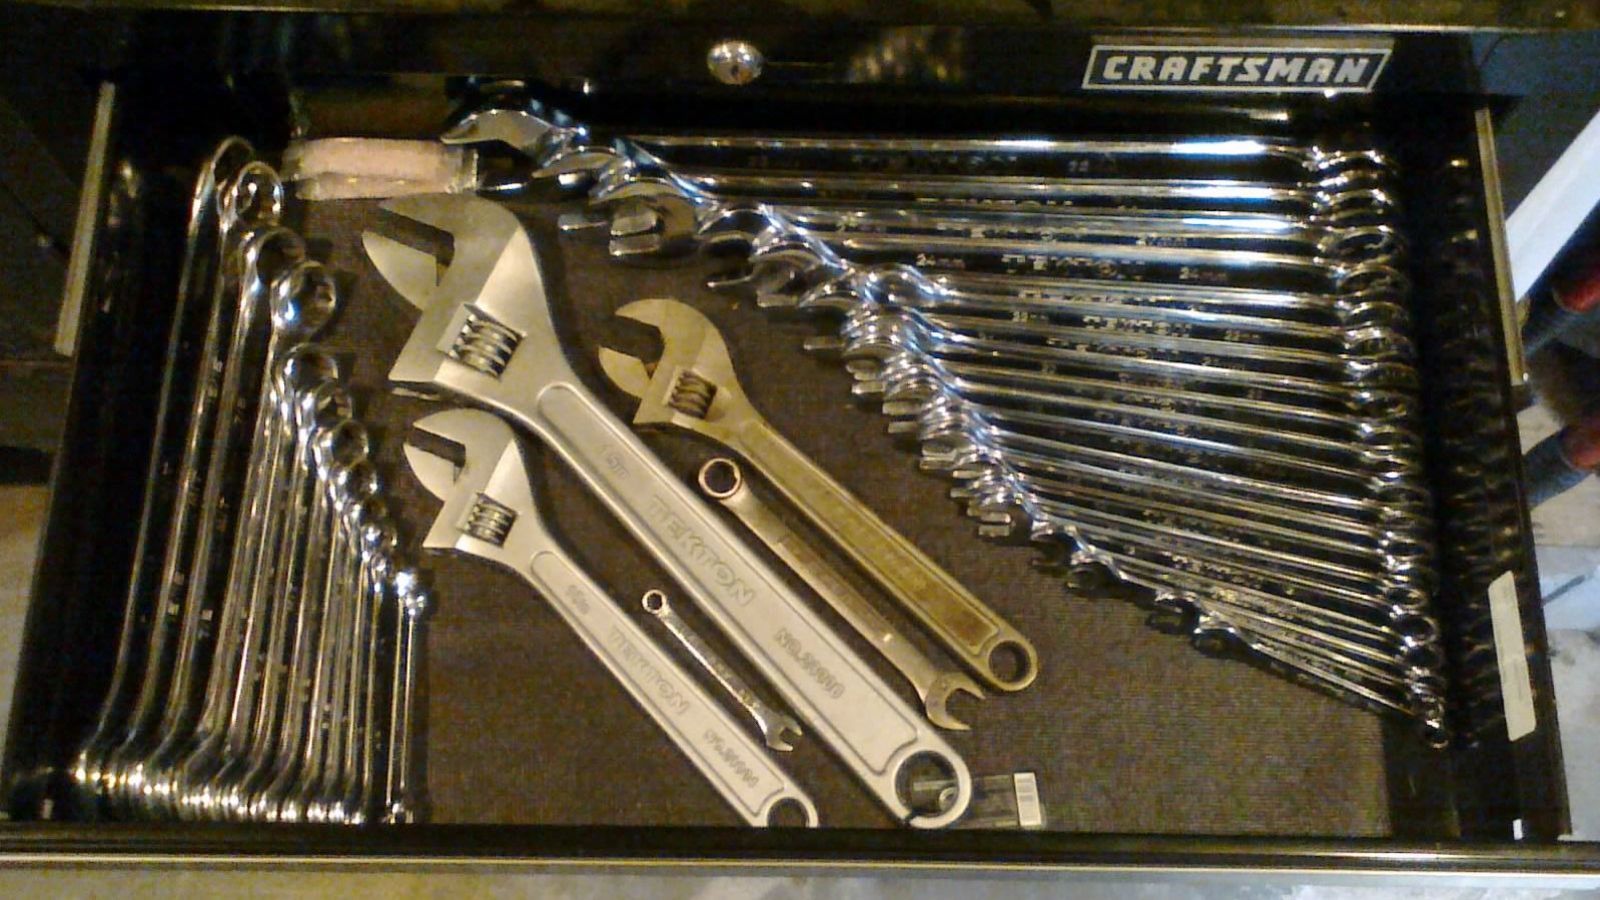 Illustration for article titled Im Driving Myself Crazy Designing a Wrench Organizer